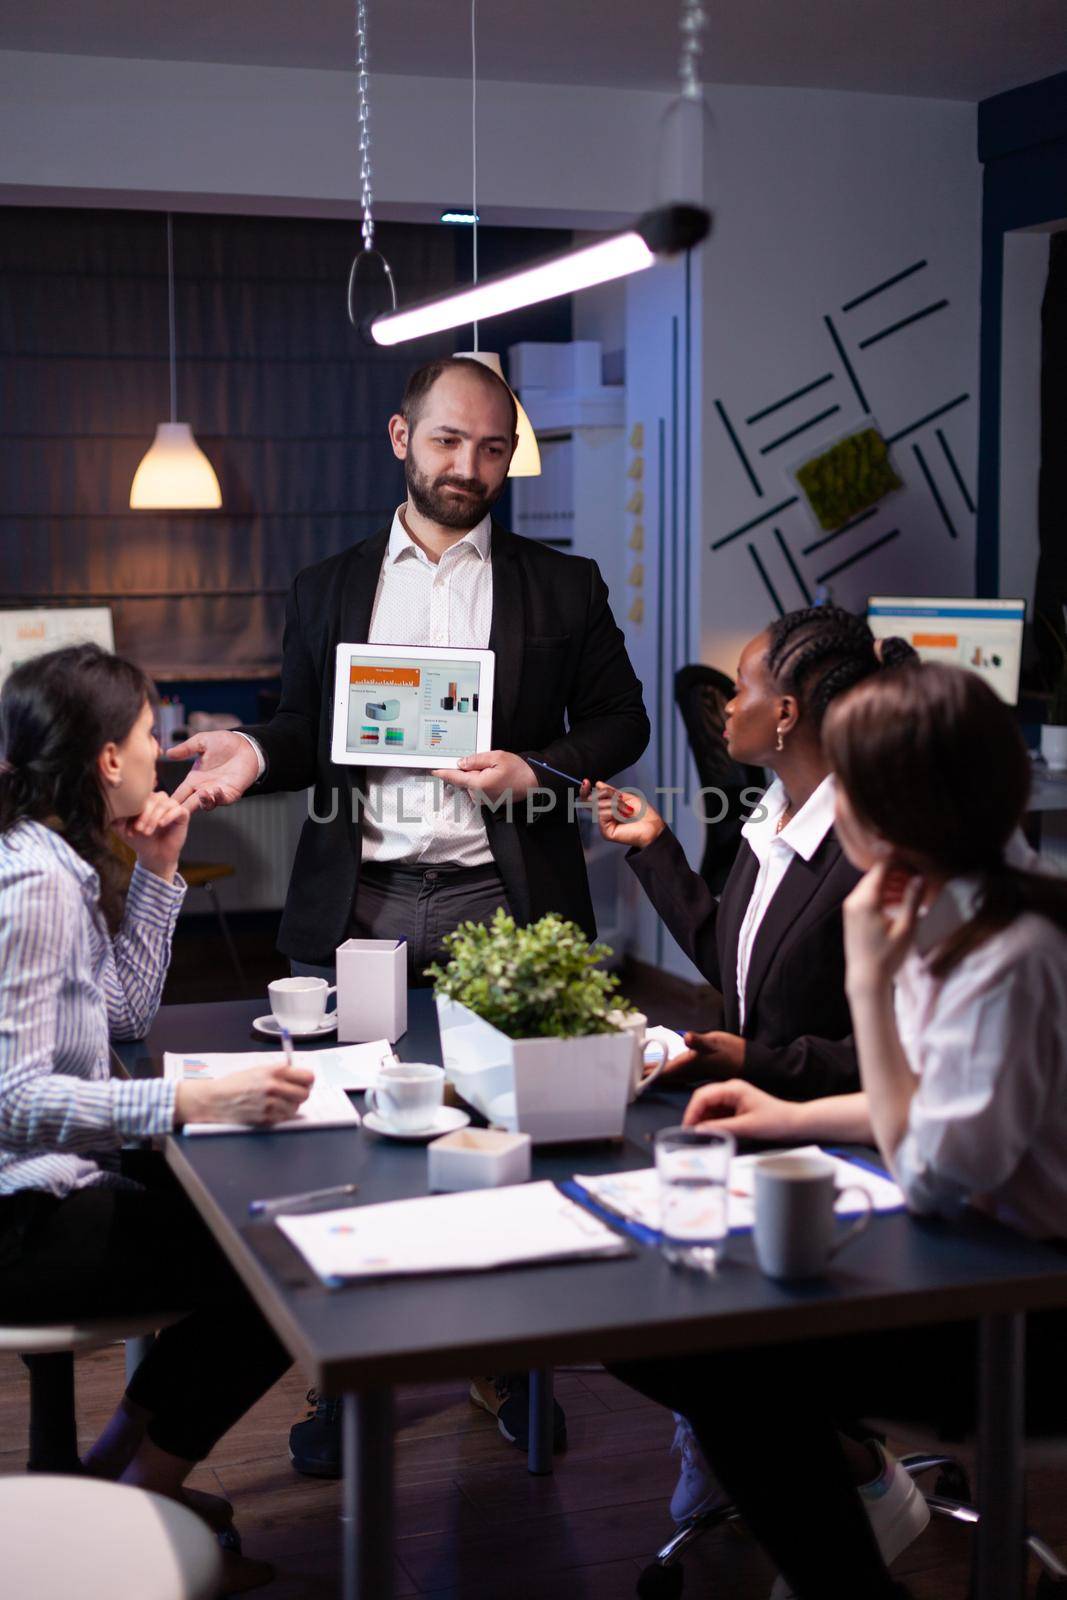 Business entrepreneur man presenting company statistics using tablet for financial presentation. Diverse multi-ethnic businesspeople brainstorming strategy working in office meeting room late at night